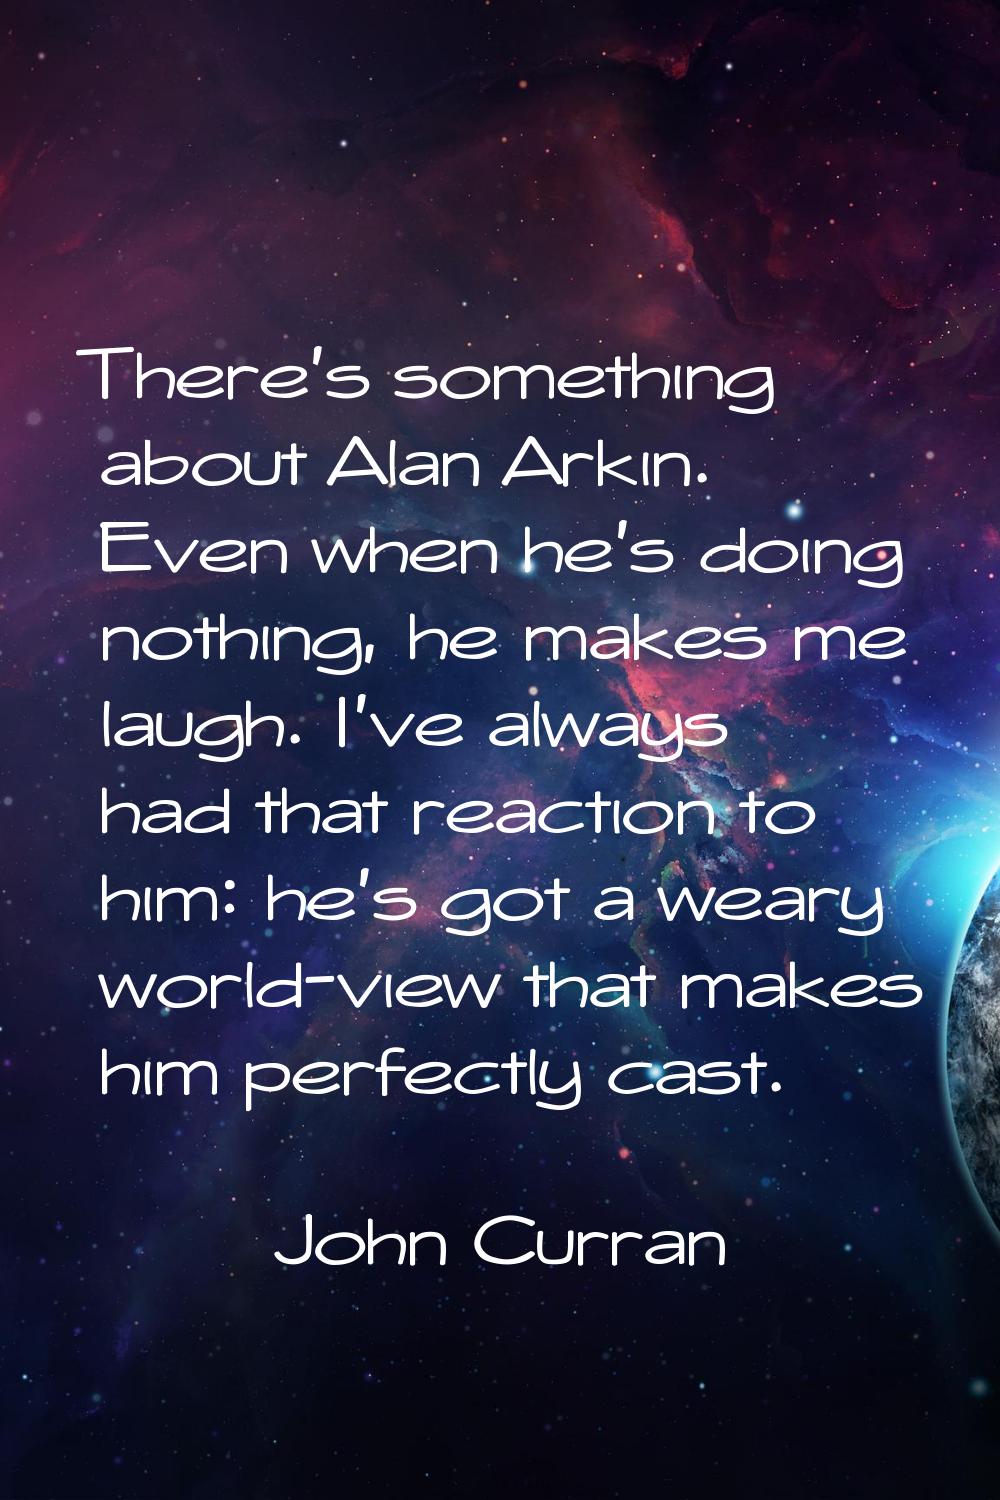 There's something about Alan Arkin. Even when he's doing nothing, he makes me laugh. I've always ha